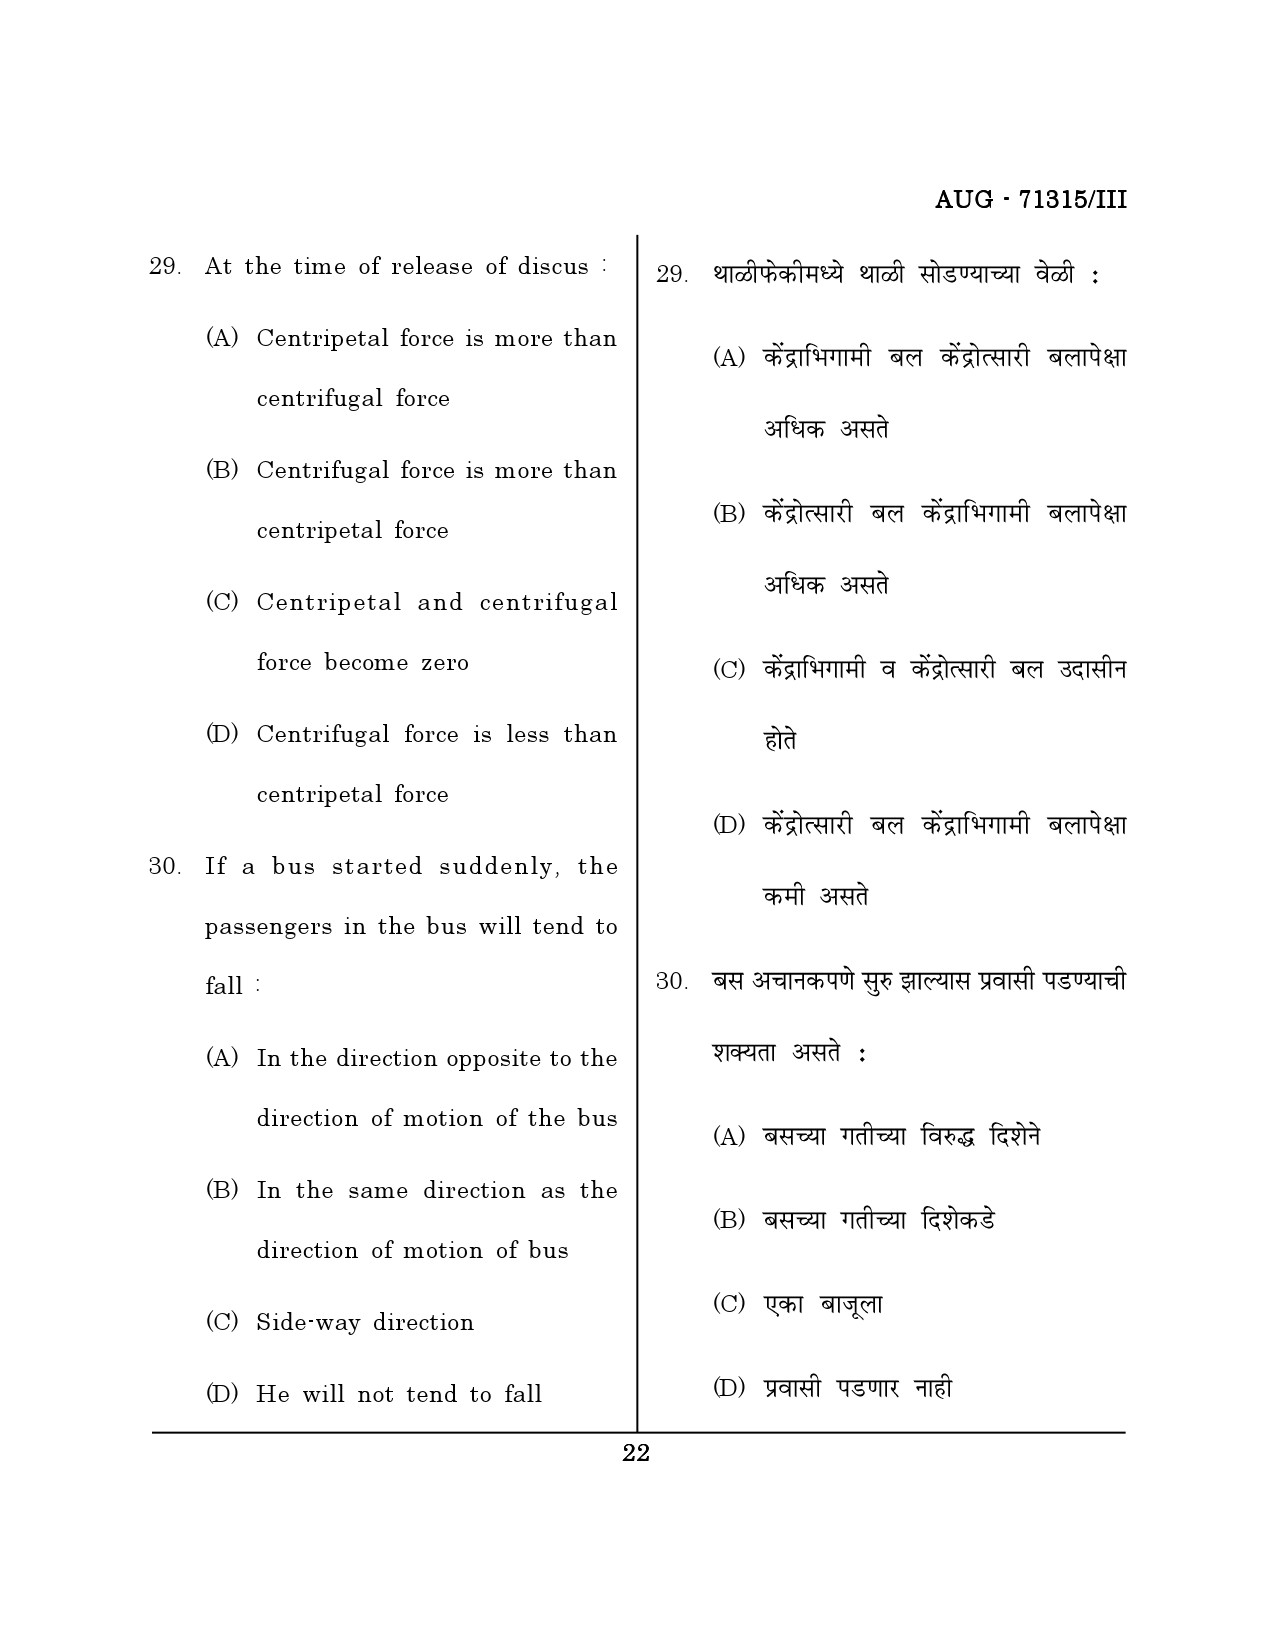 Maharashtra SET Physical Education Question Paper III August 2015 21